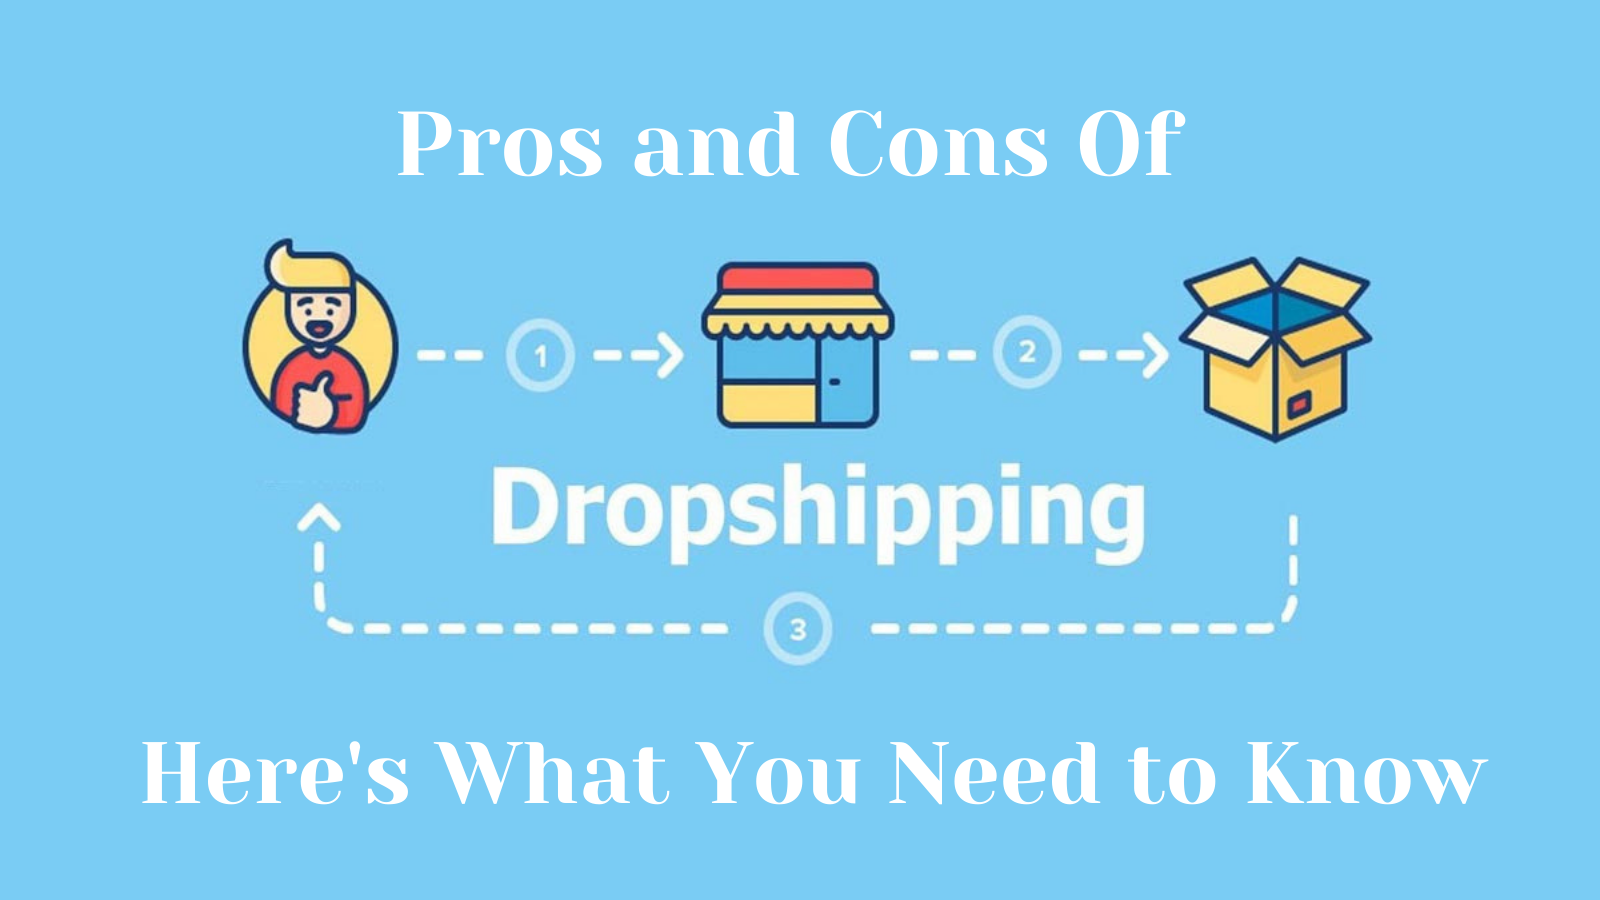 pros-and-cons-dropshipping